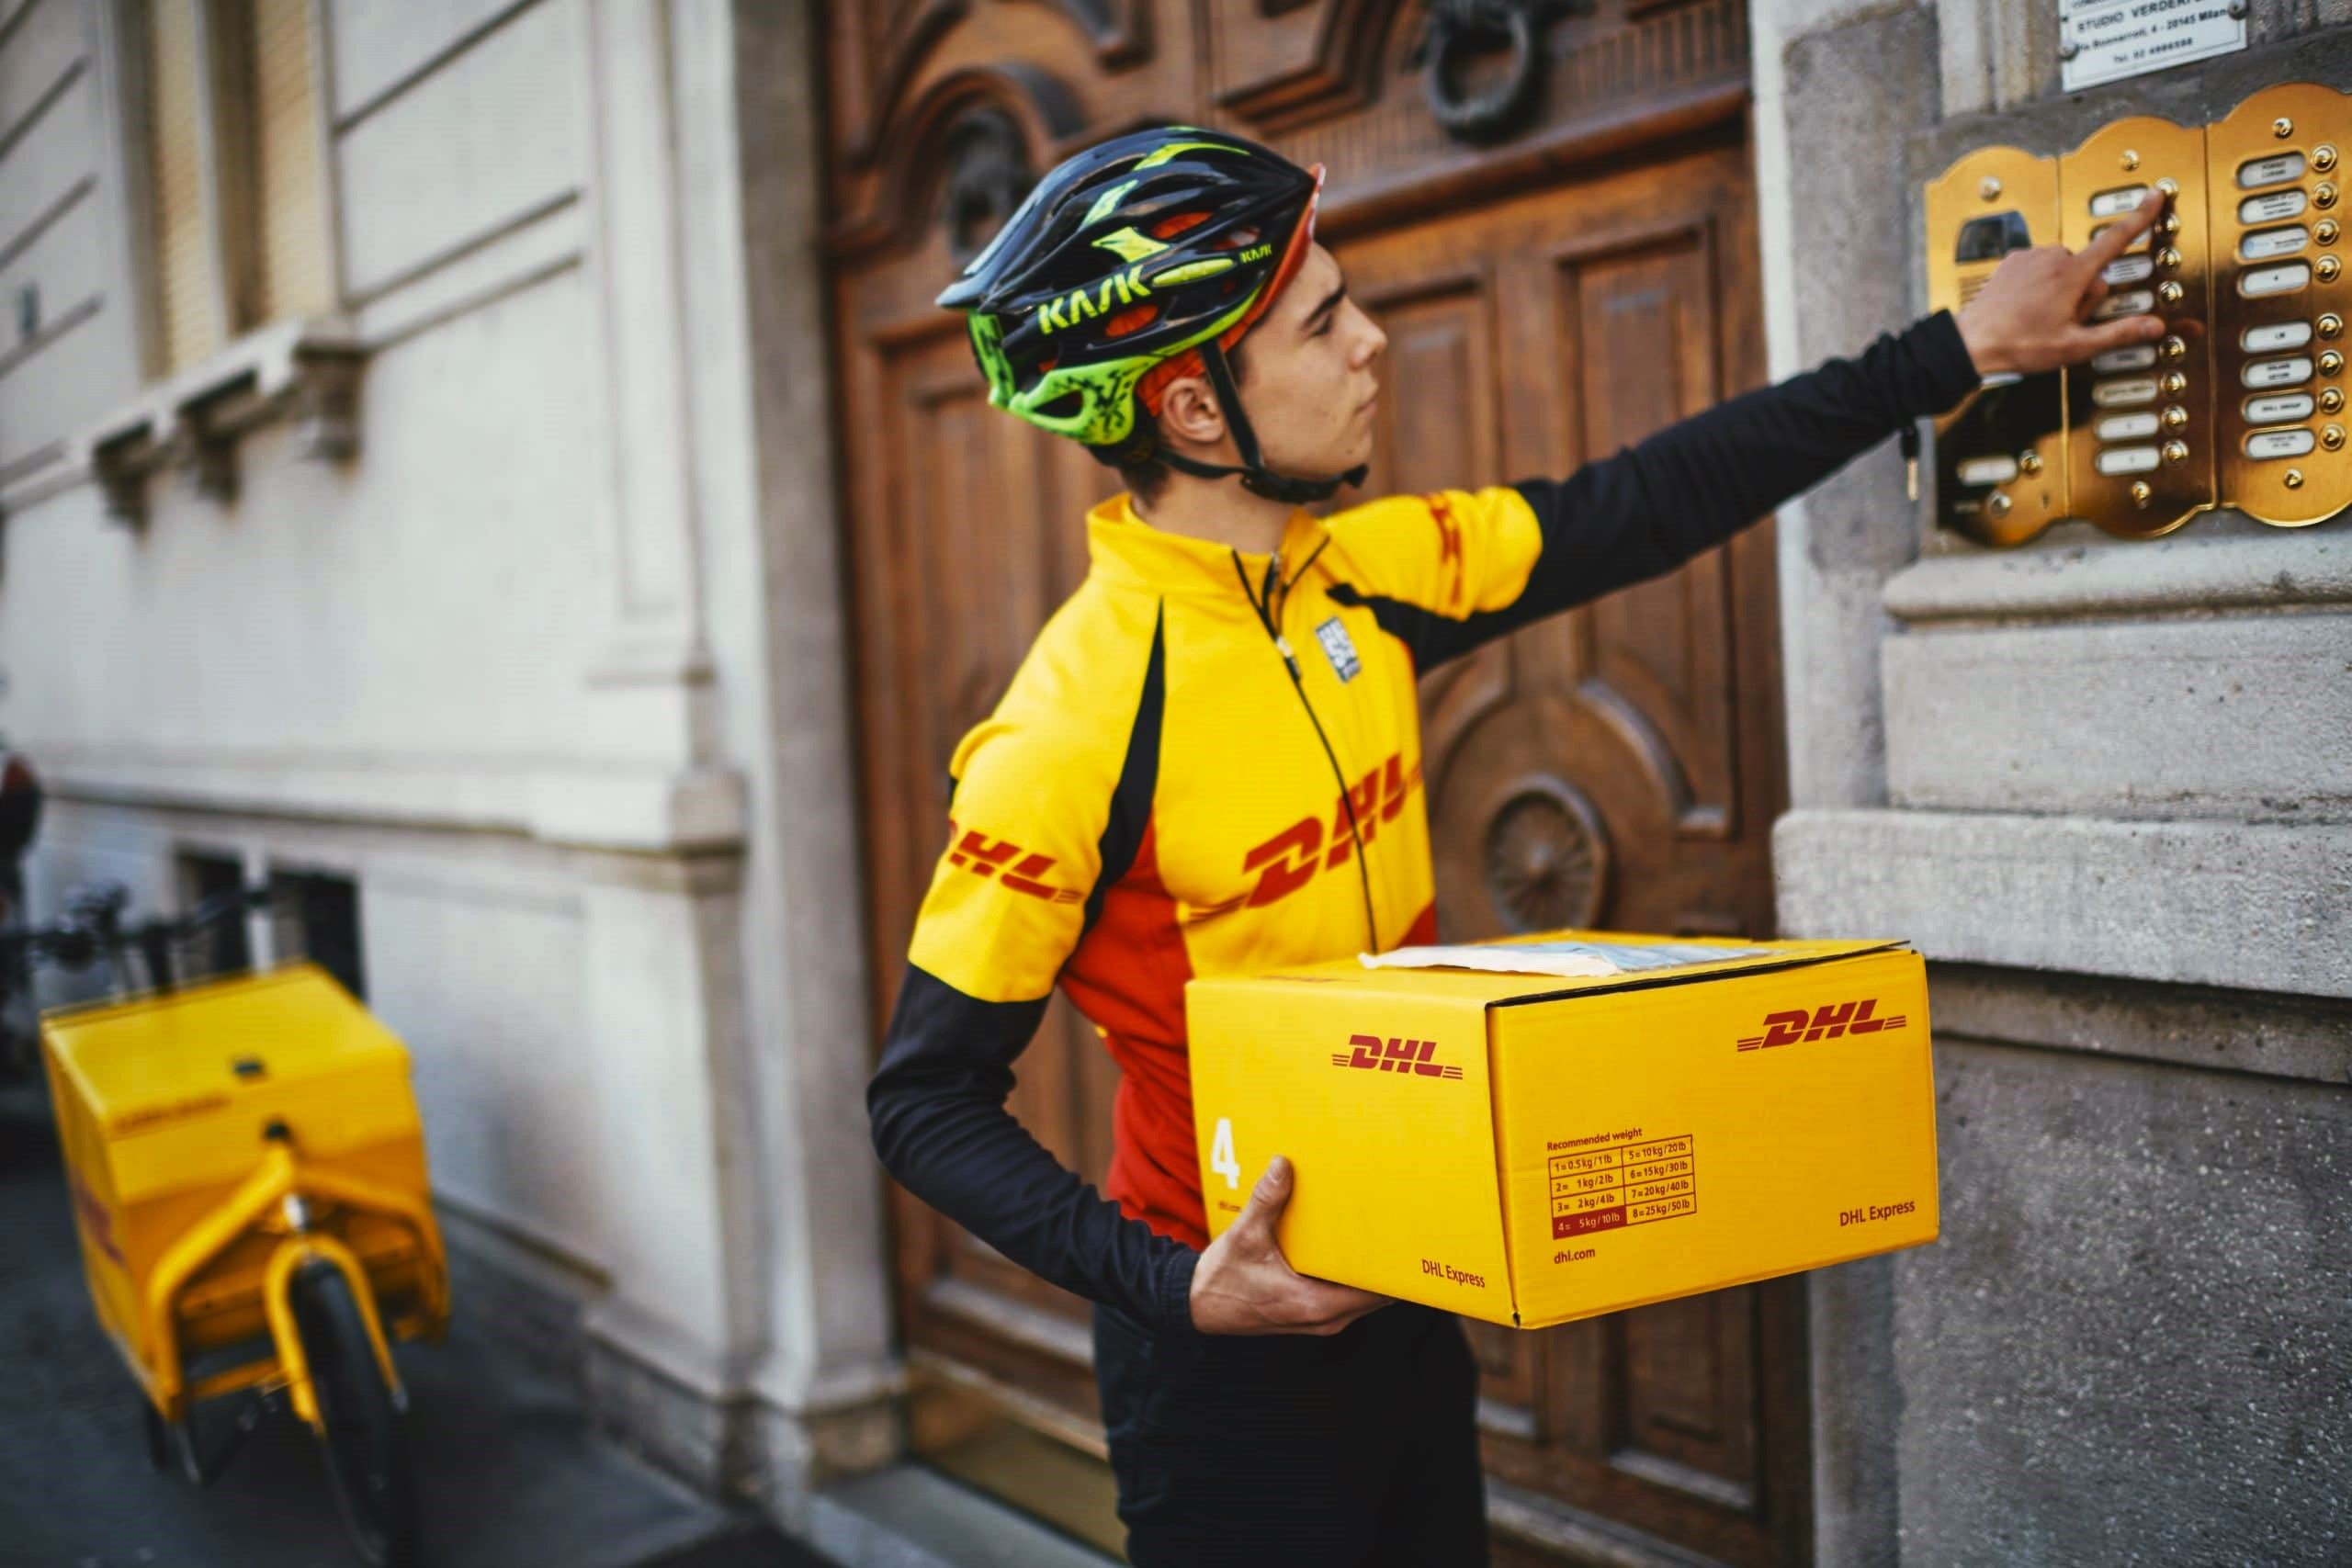 DHL's Surprising Delivery Option: Mailbox Delivery!